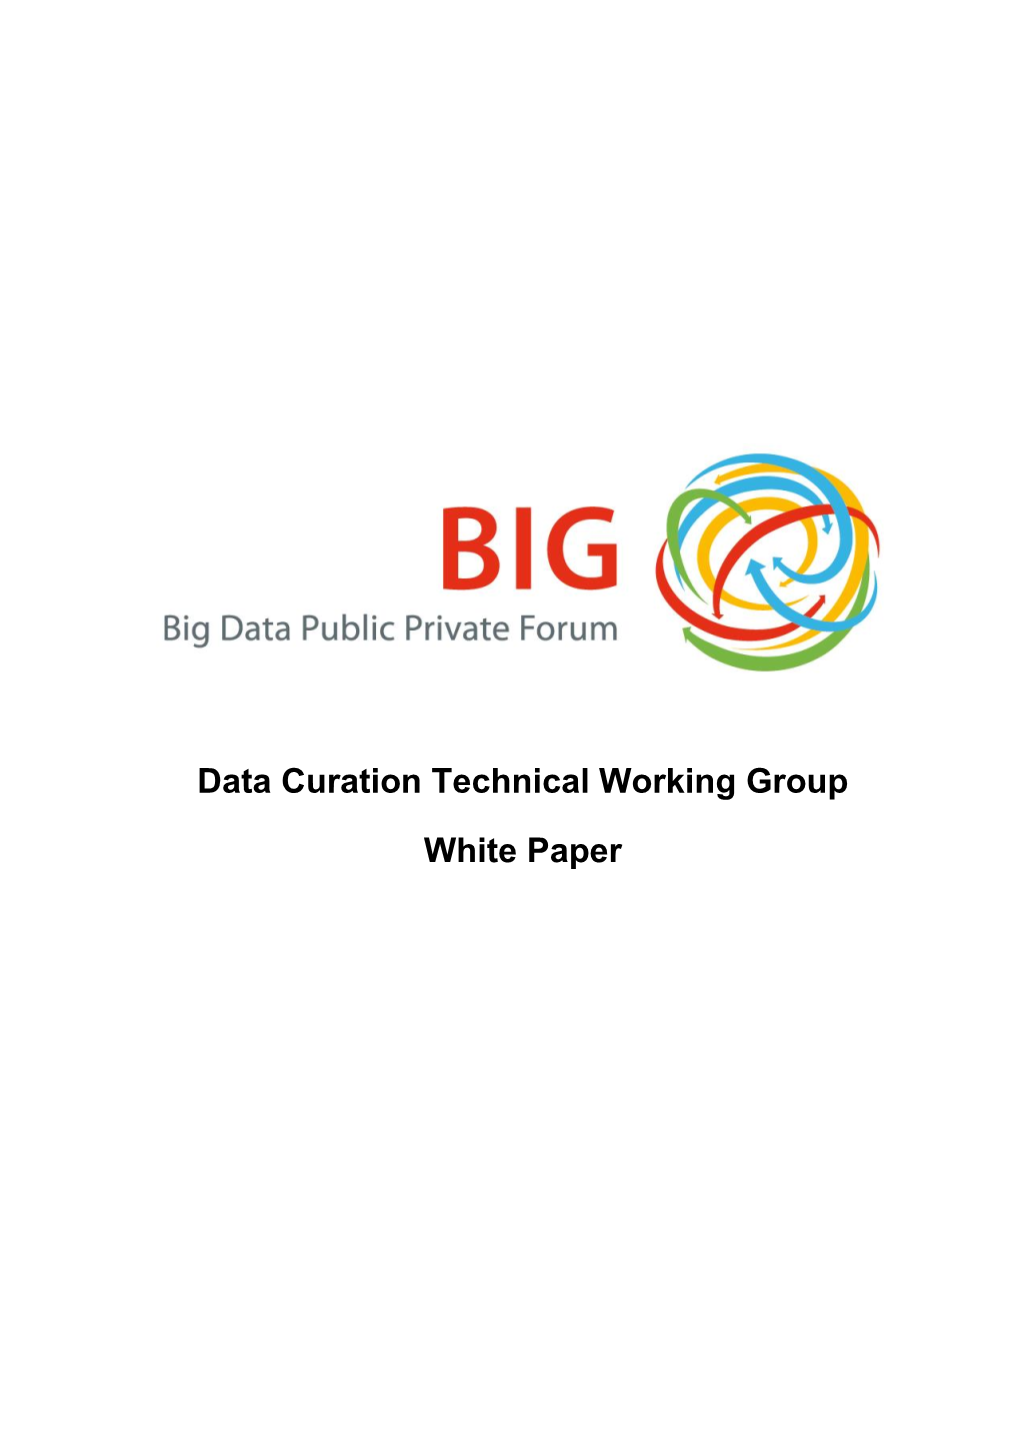 Data Curation Technical Working Group